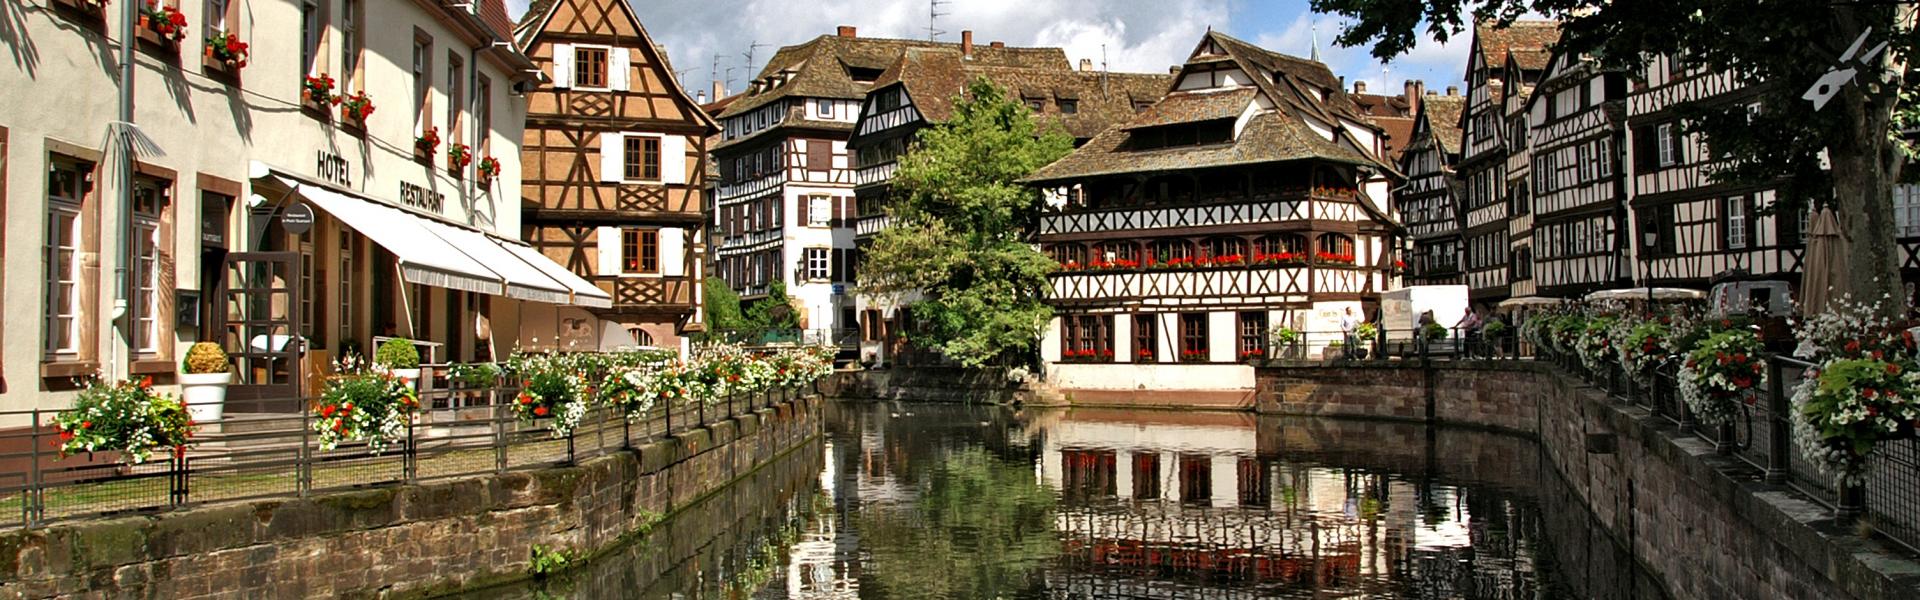 Find the perfect vacation home Alsace - Casamundo